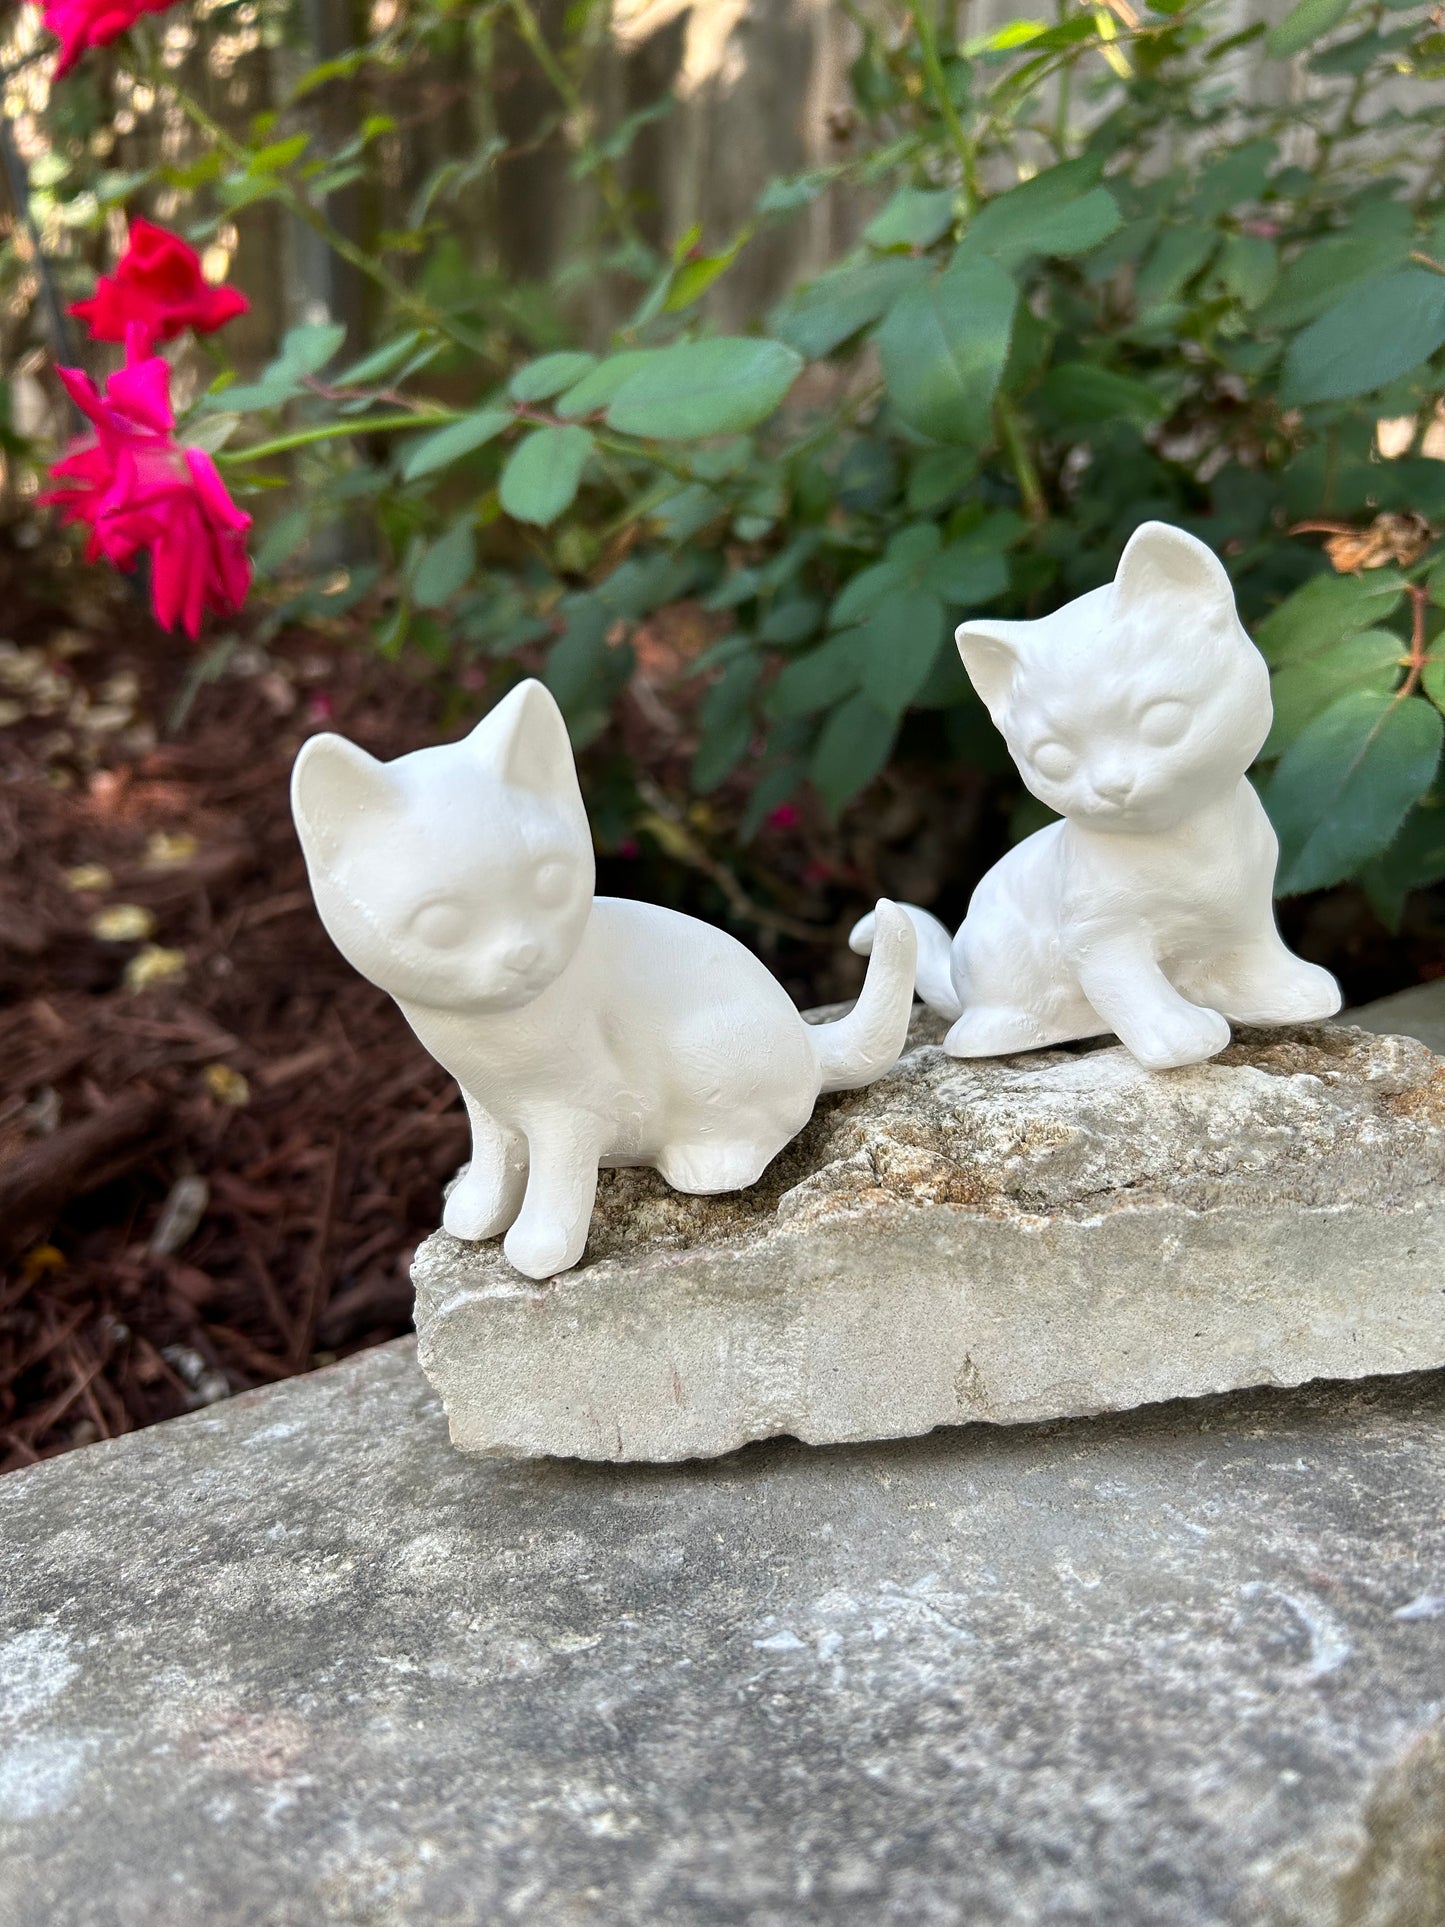 2 handmade sitting ready to paint cats sitting on white stones in front of a rose bush.  the cats are sitting wth their tails near each other and their faces forward